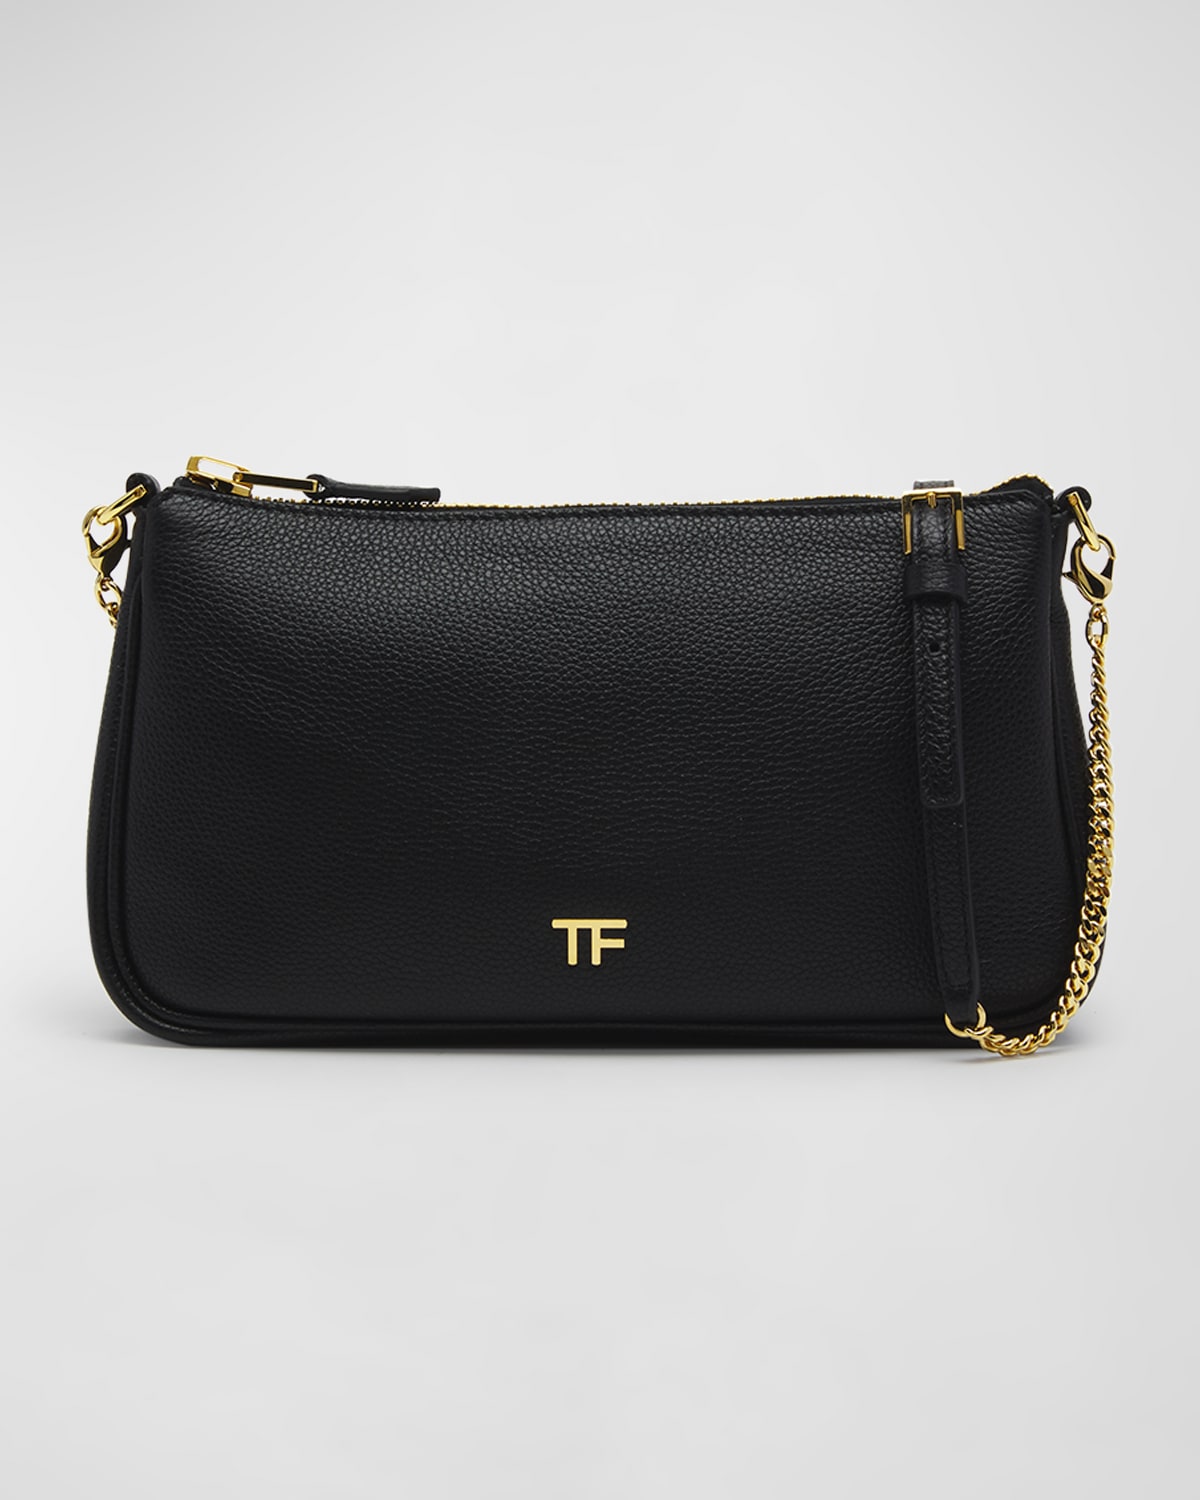 TOM FORD TF MINI CROSSBODY IN GRAINED LEATHER